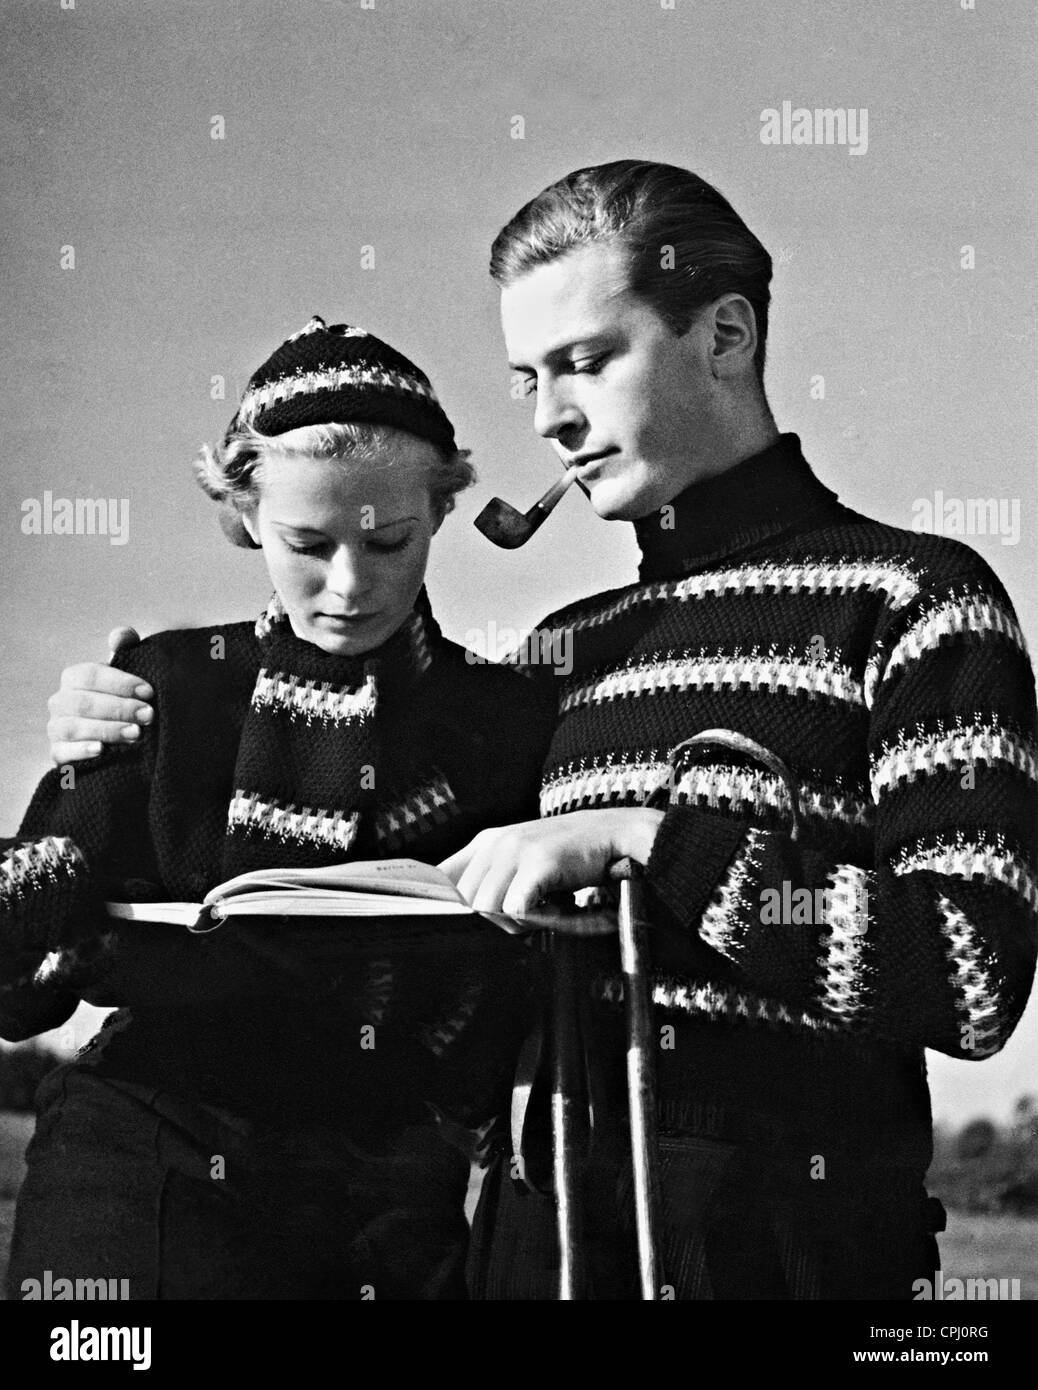 Curd Juergens models ski fashions, 1934 Stock Photo